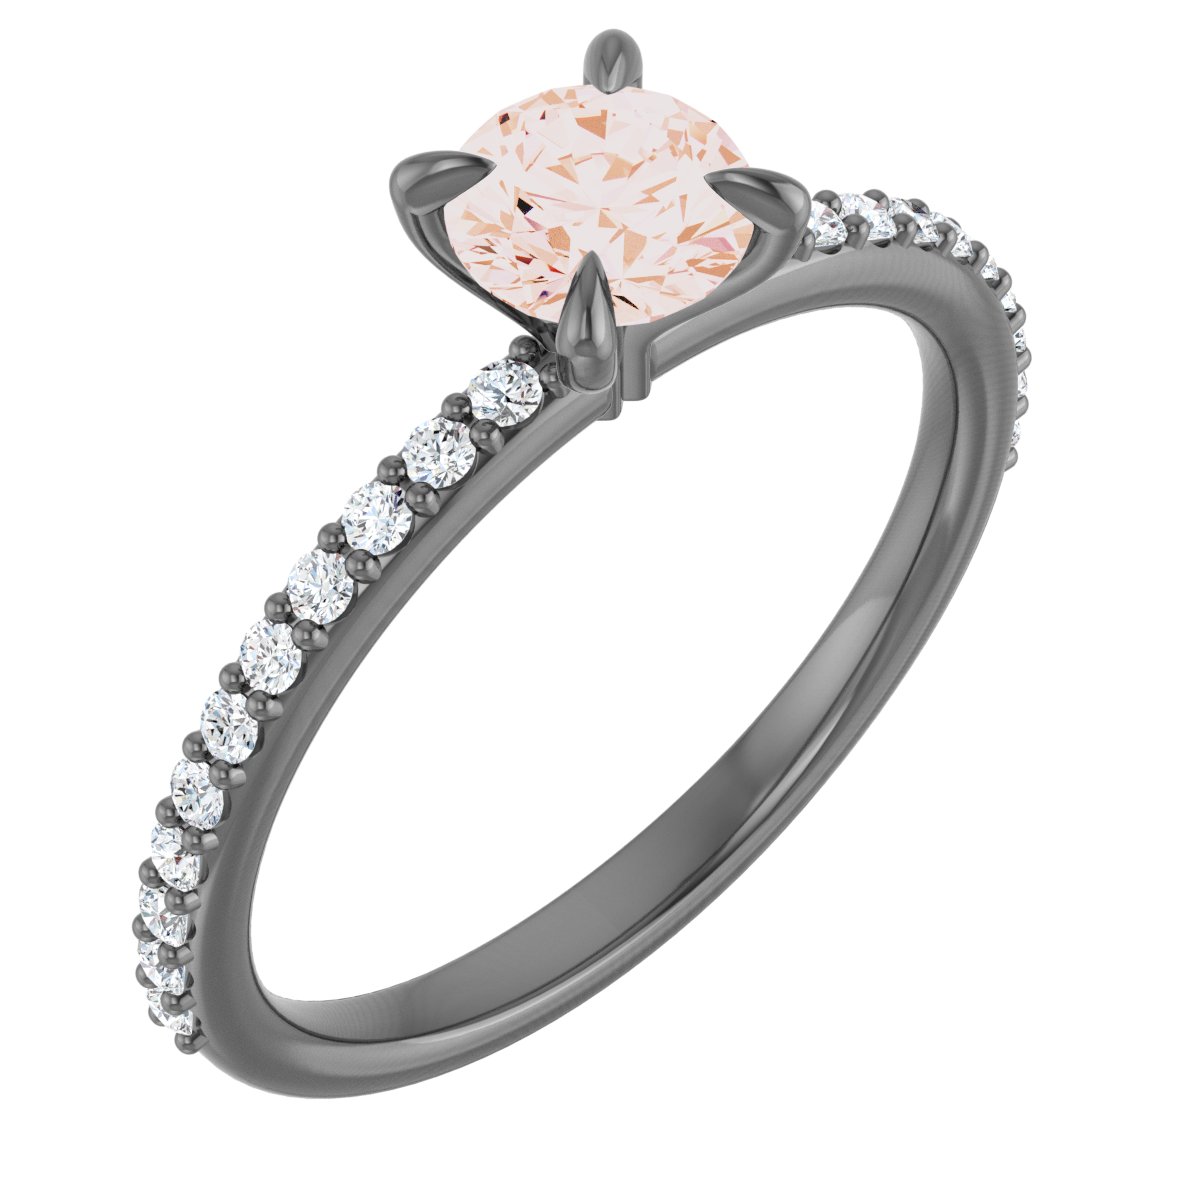 14K Rose 4 mm Round Forever One Moissanite and .20 CTW Diamond Engagement Ring Ref 13877876